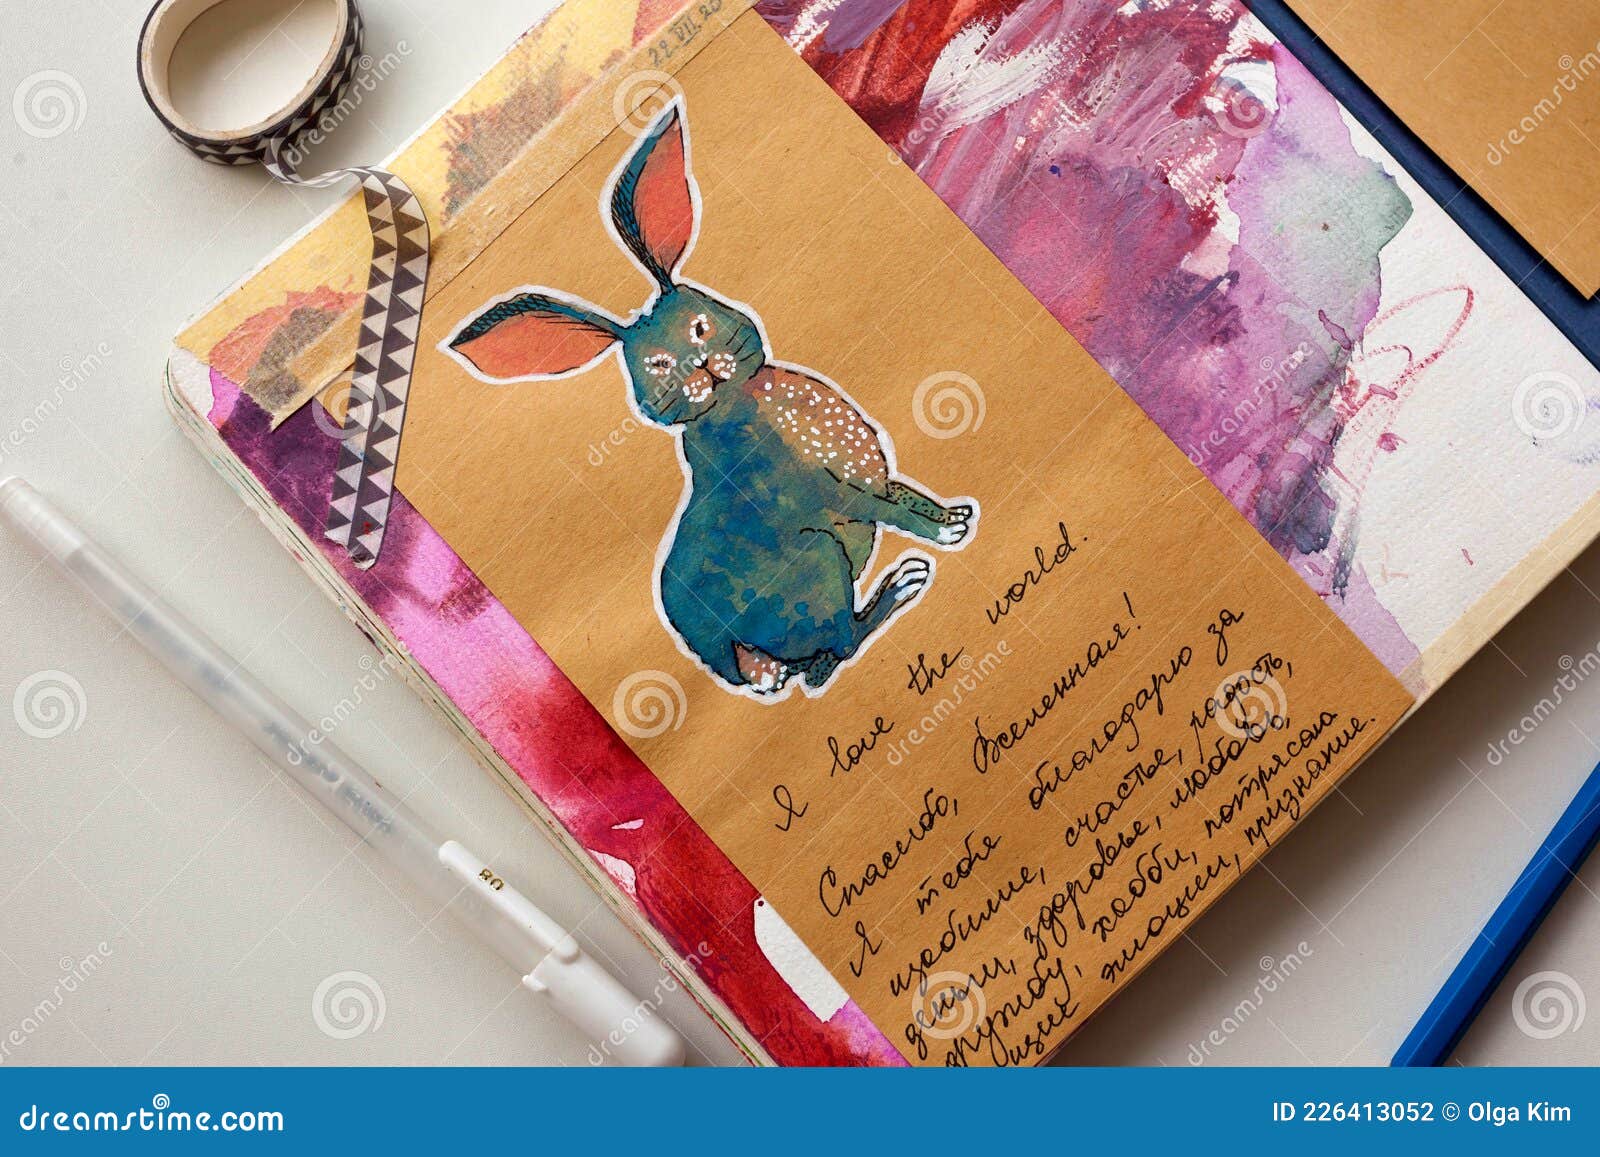 Rabit on Craft Paper in a Journal for Scrapbooking Editorial